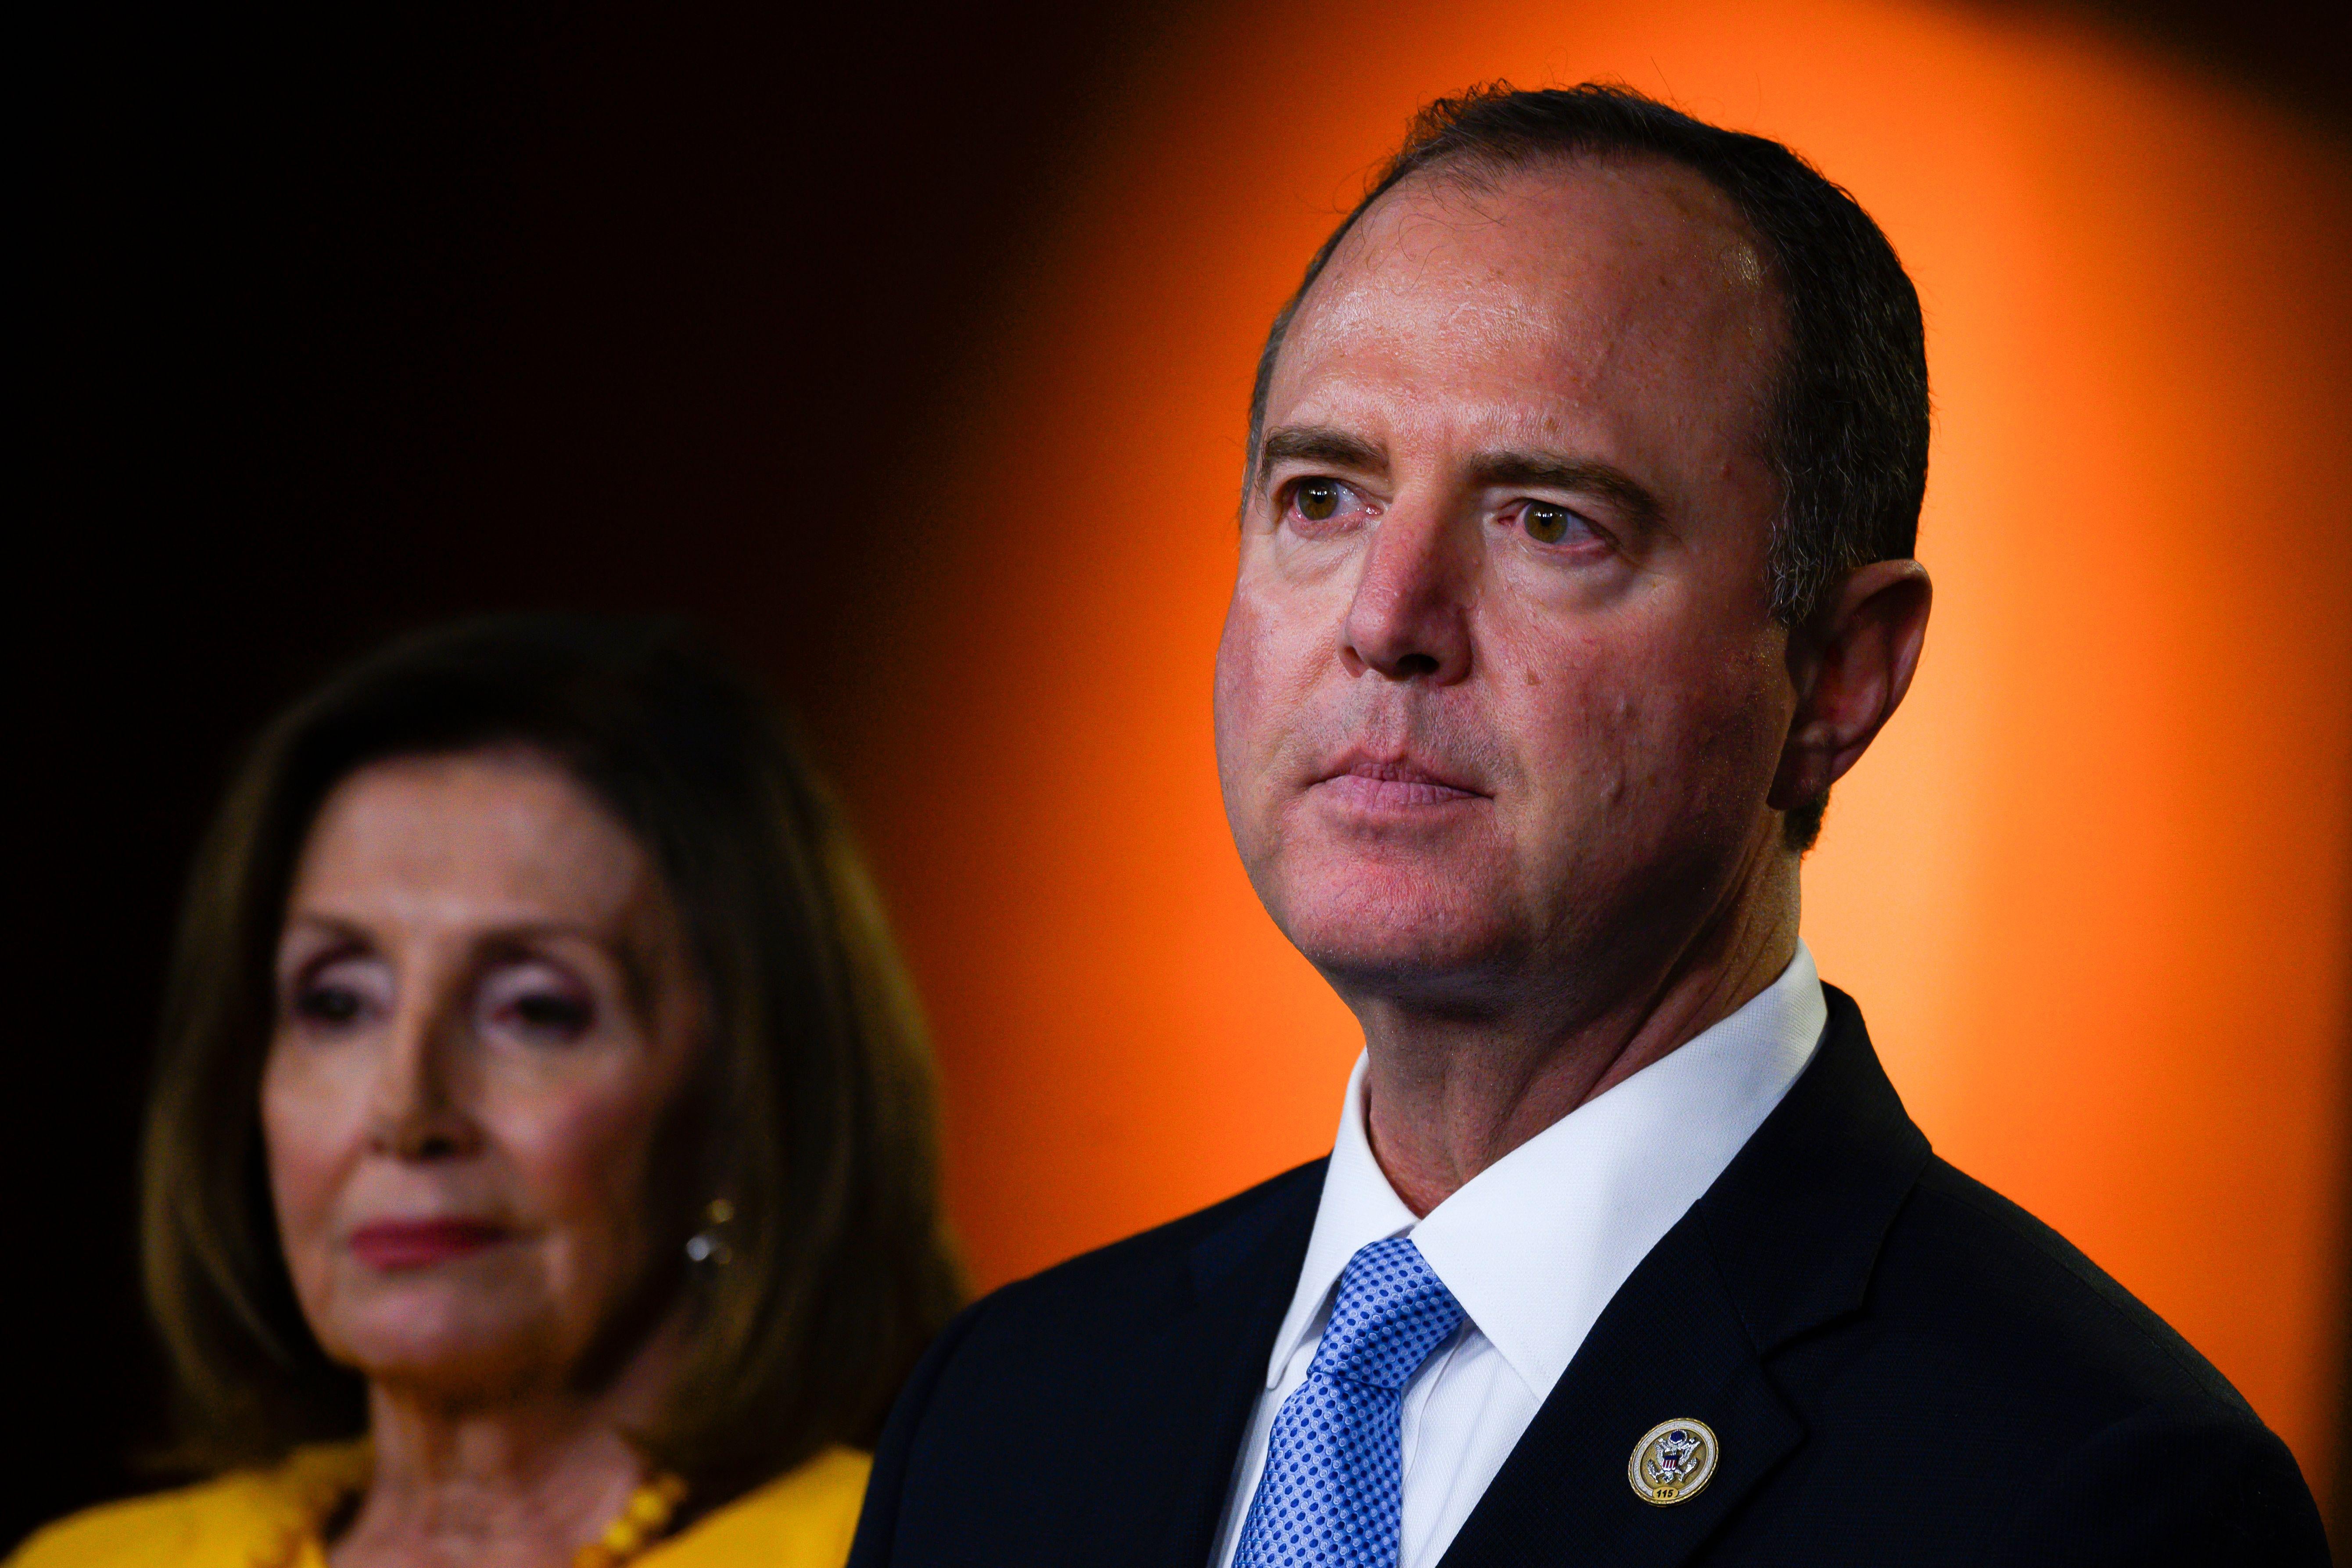 House Speaker Nancy Pelosi and House Intelligence Committee Chairman Adam Schiff deliver a press conference following the former Special Counsel's testimony before the House Select Committee on Intelligence in Washington, D.C. on July 24, 2019. 